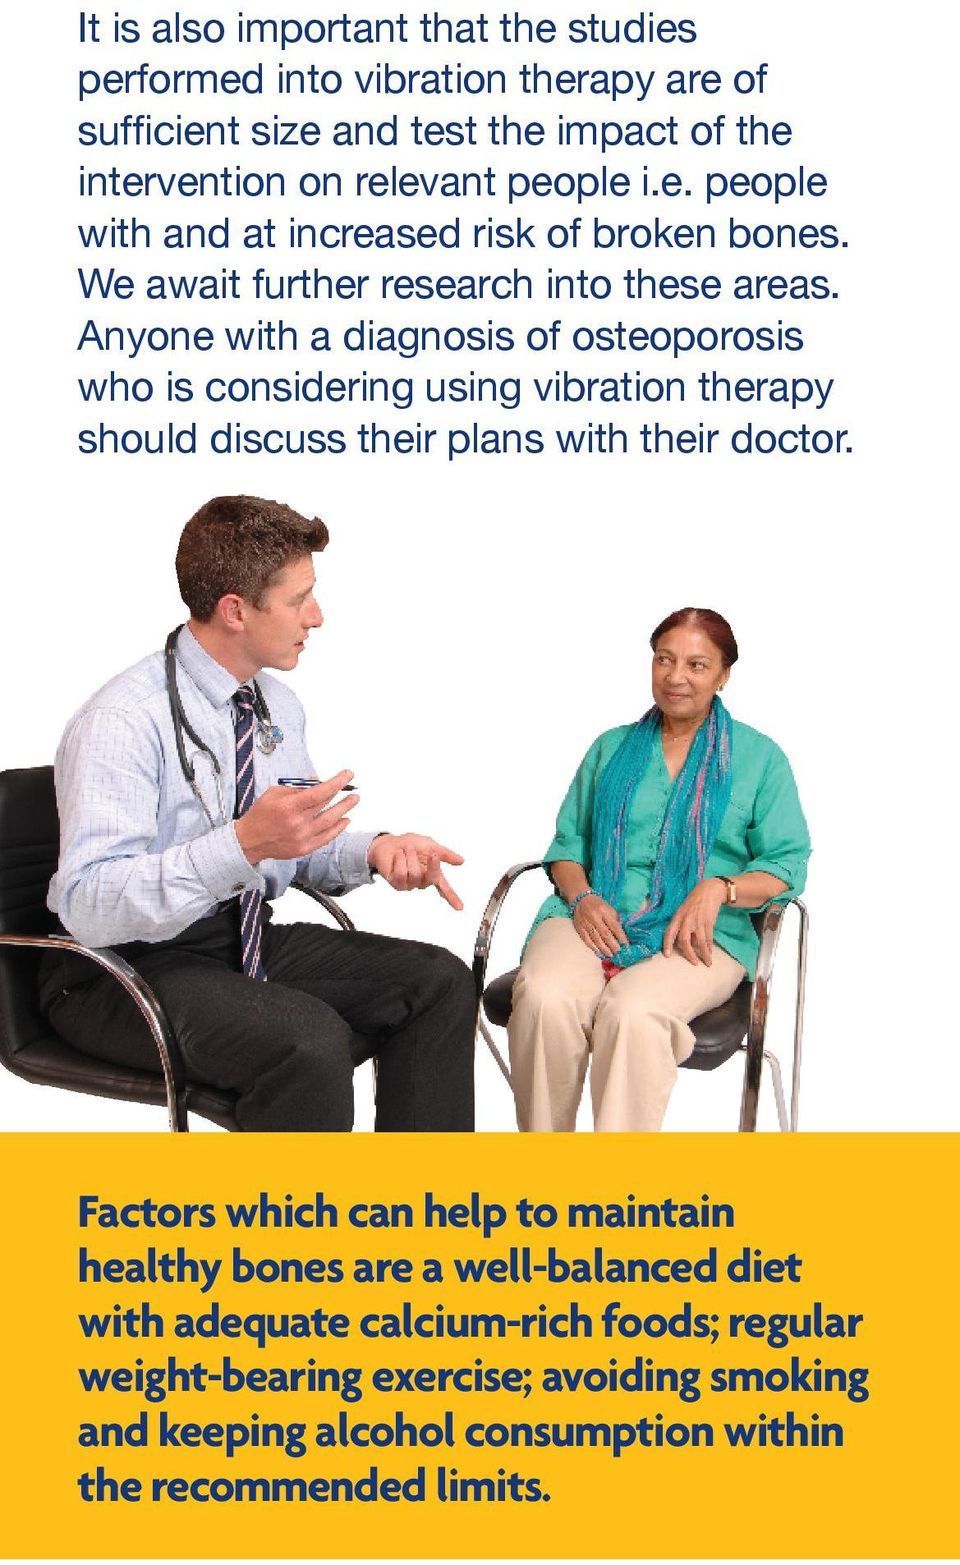 Anyone with a diagnosis of osteoporosis who is considering using vibration therapy should discuss their plans with their doctor.